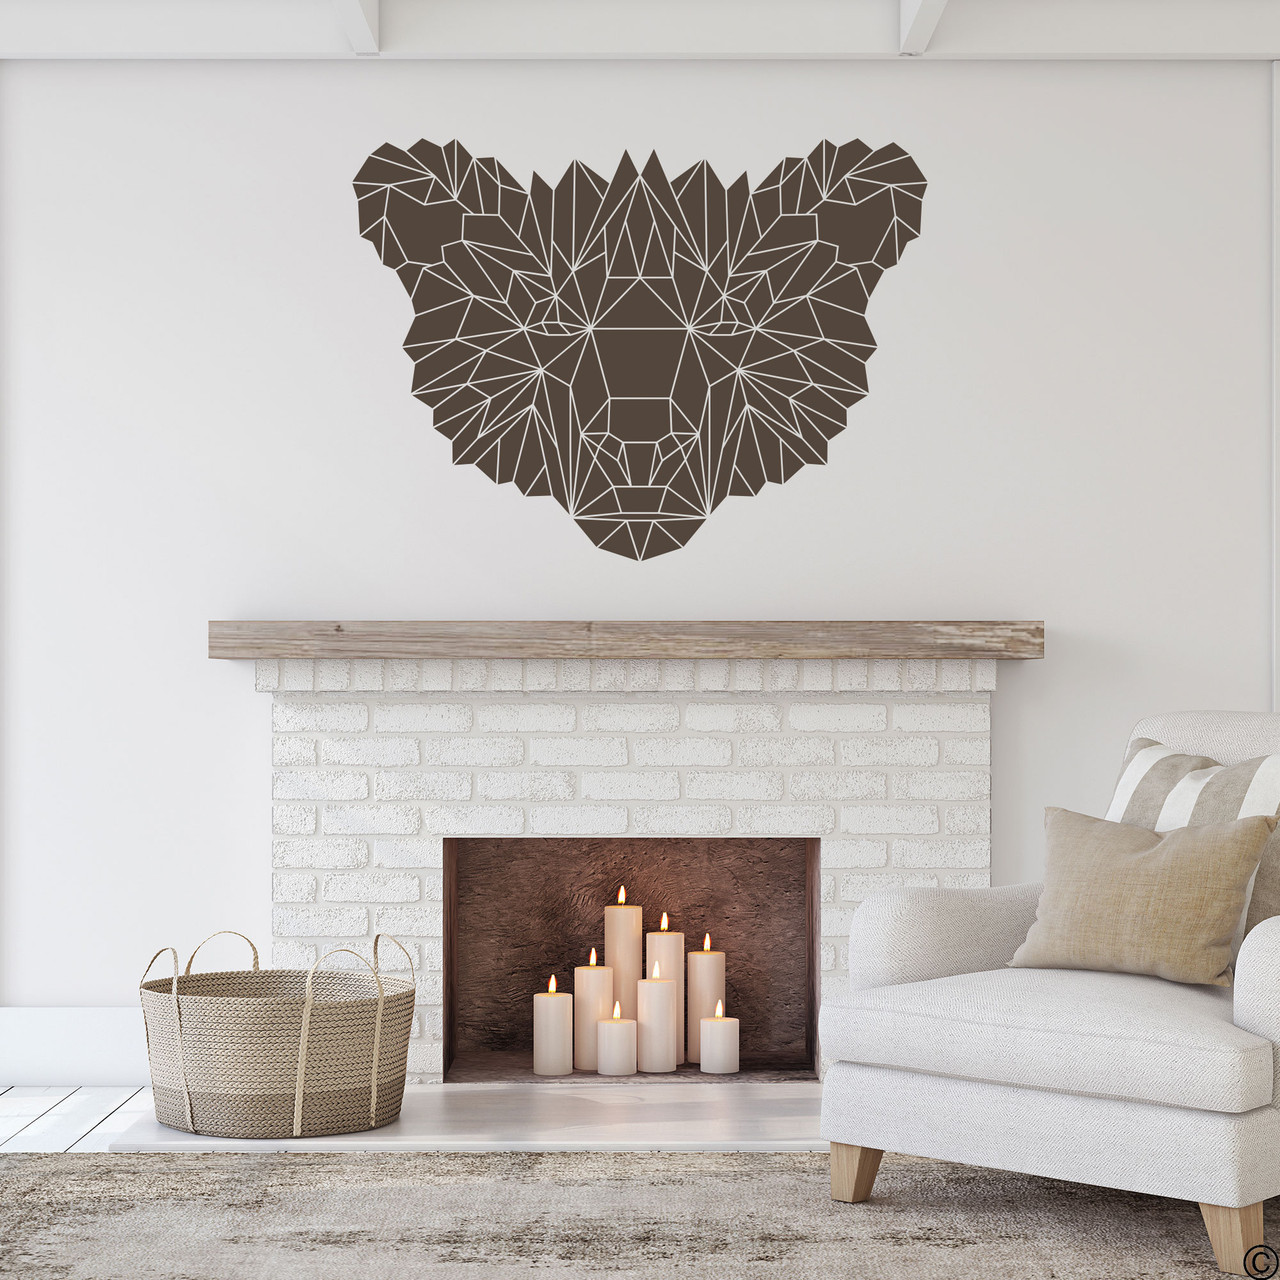 The Geometric Bear Face wall decal shown here in brown vinyl color.